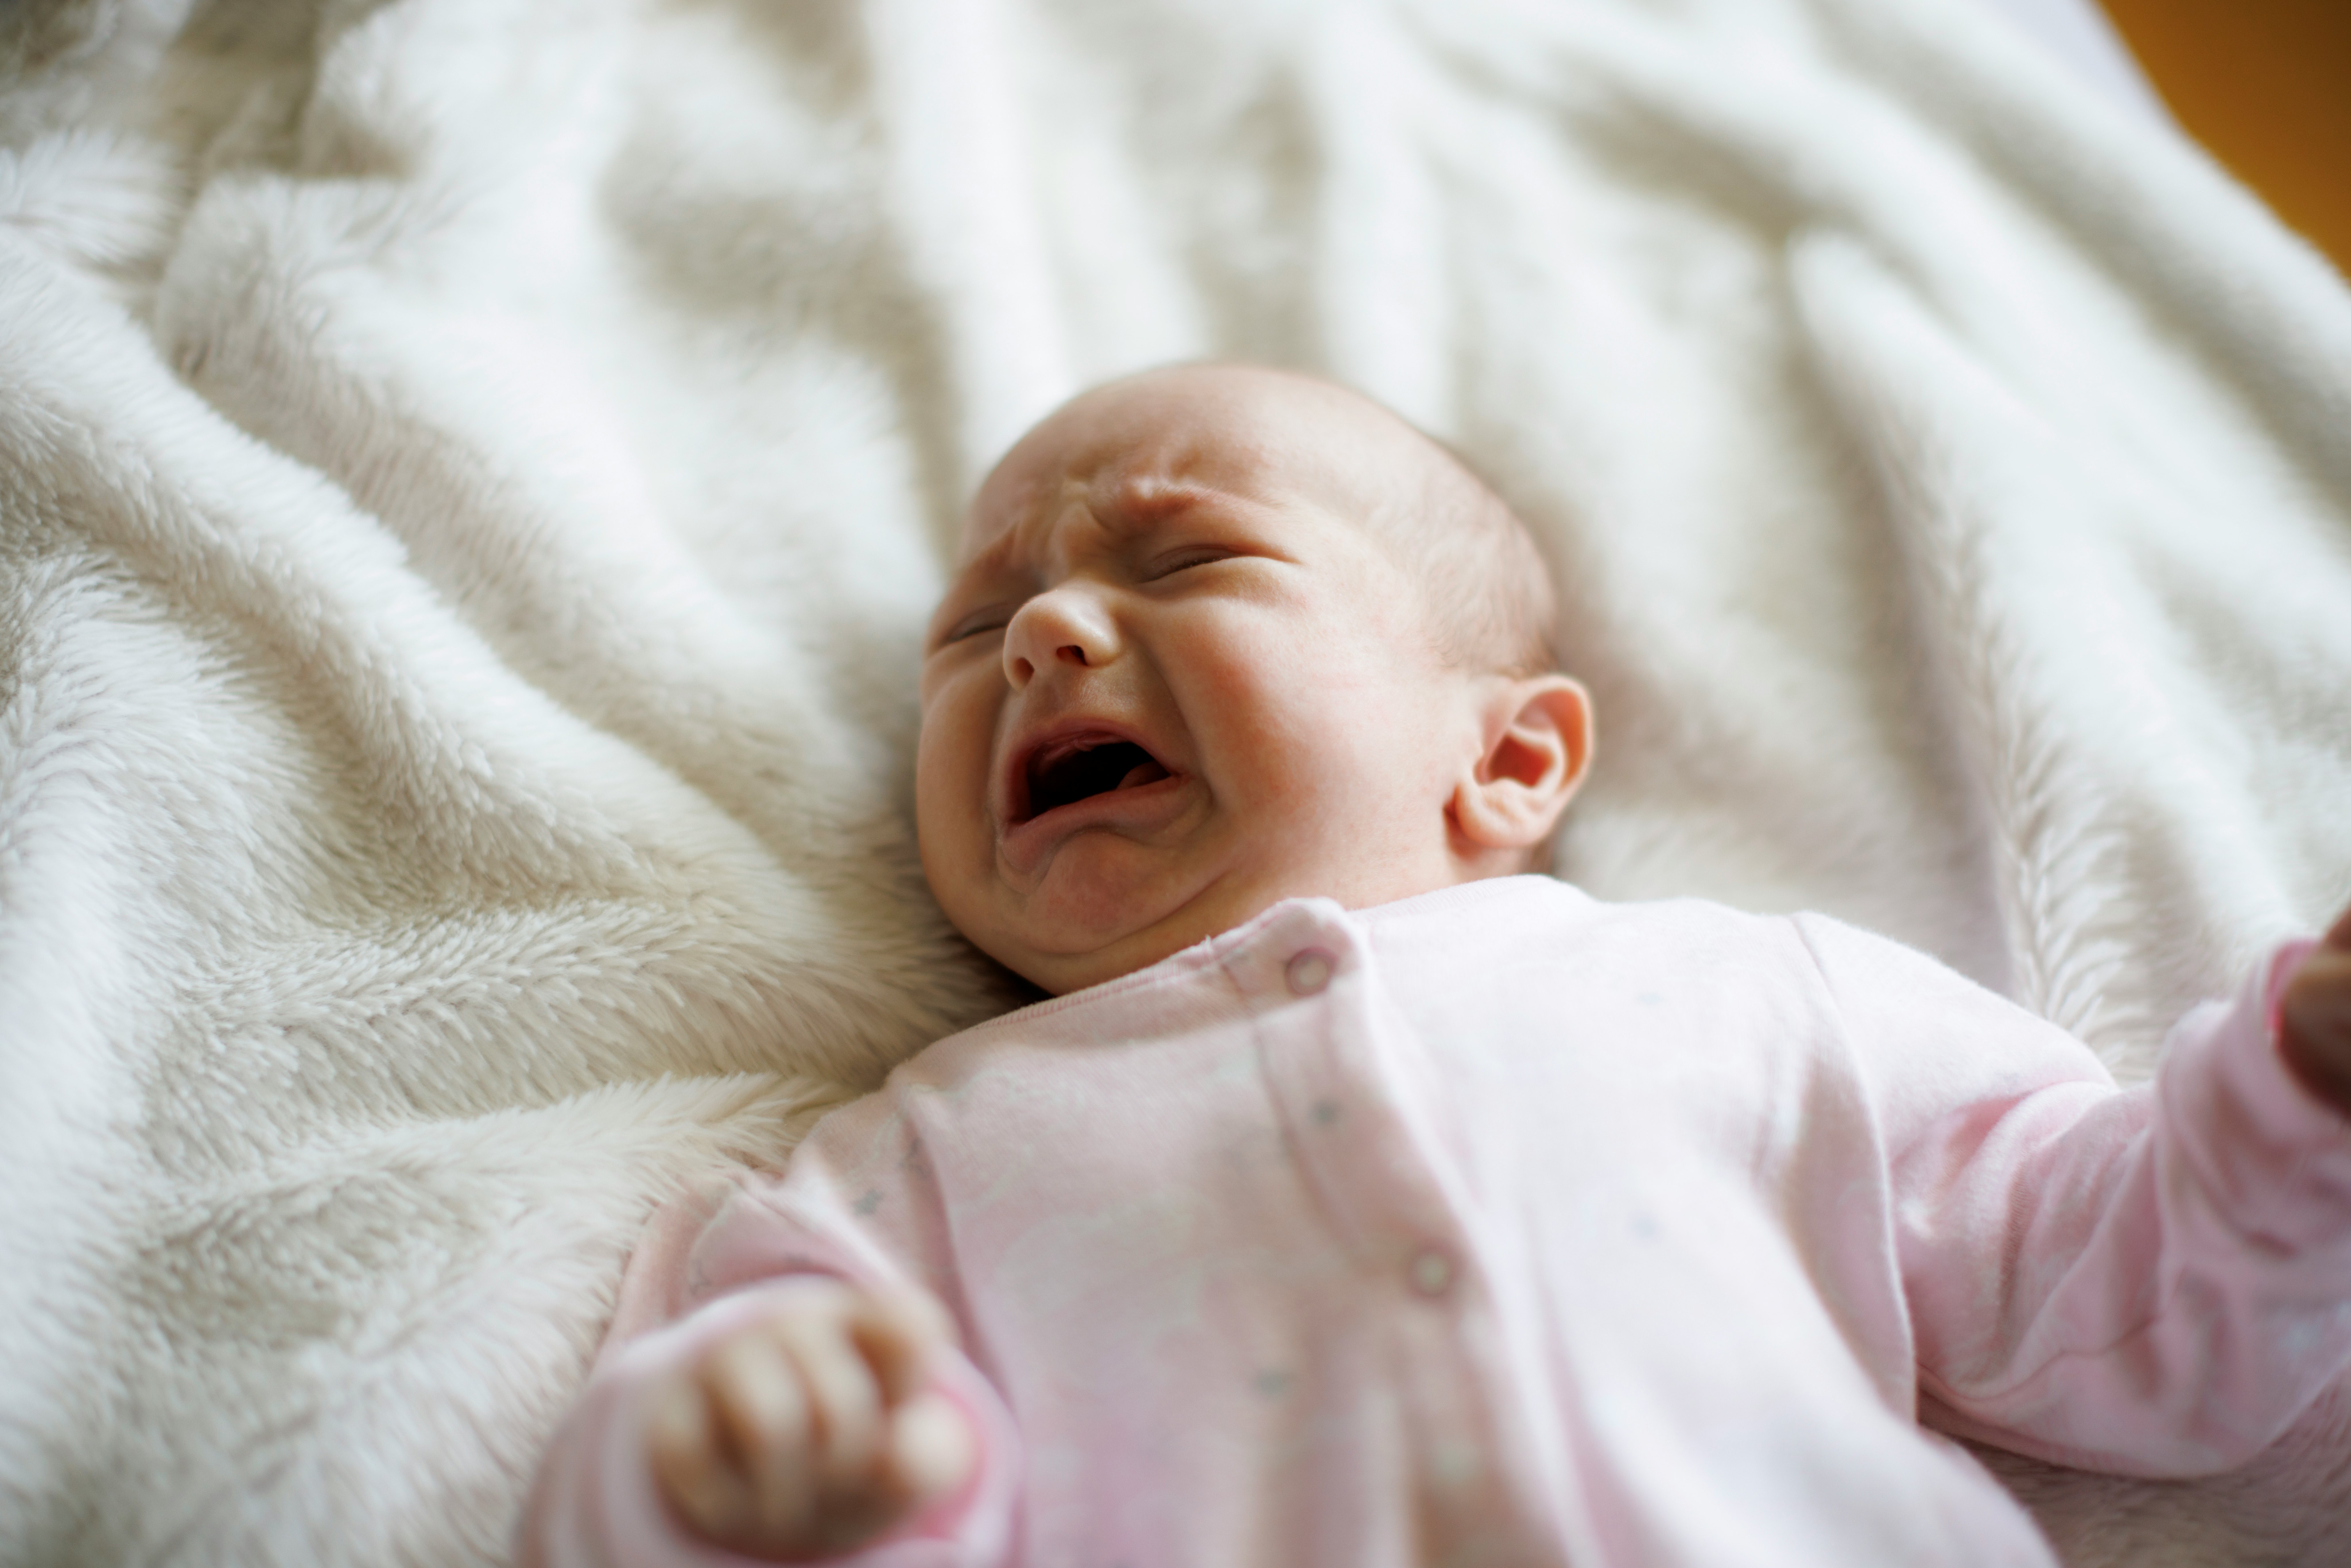 7 Signs That Your Baby is Too Hot While Sleeping: What To Look Out